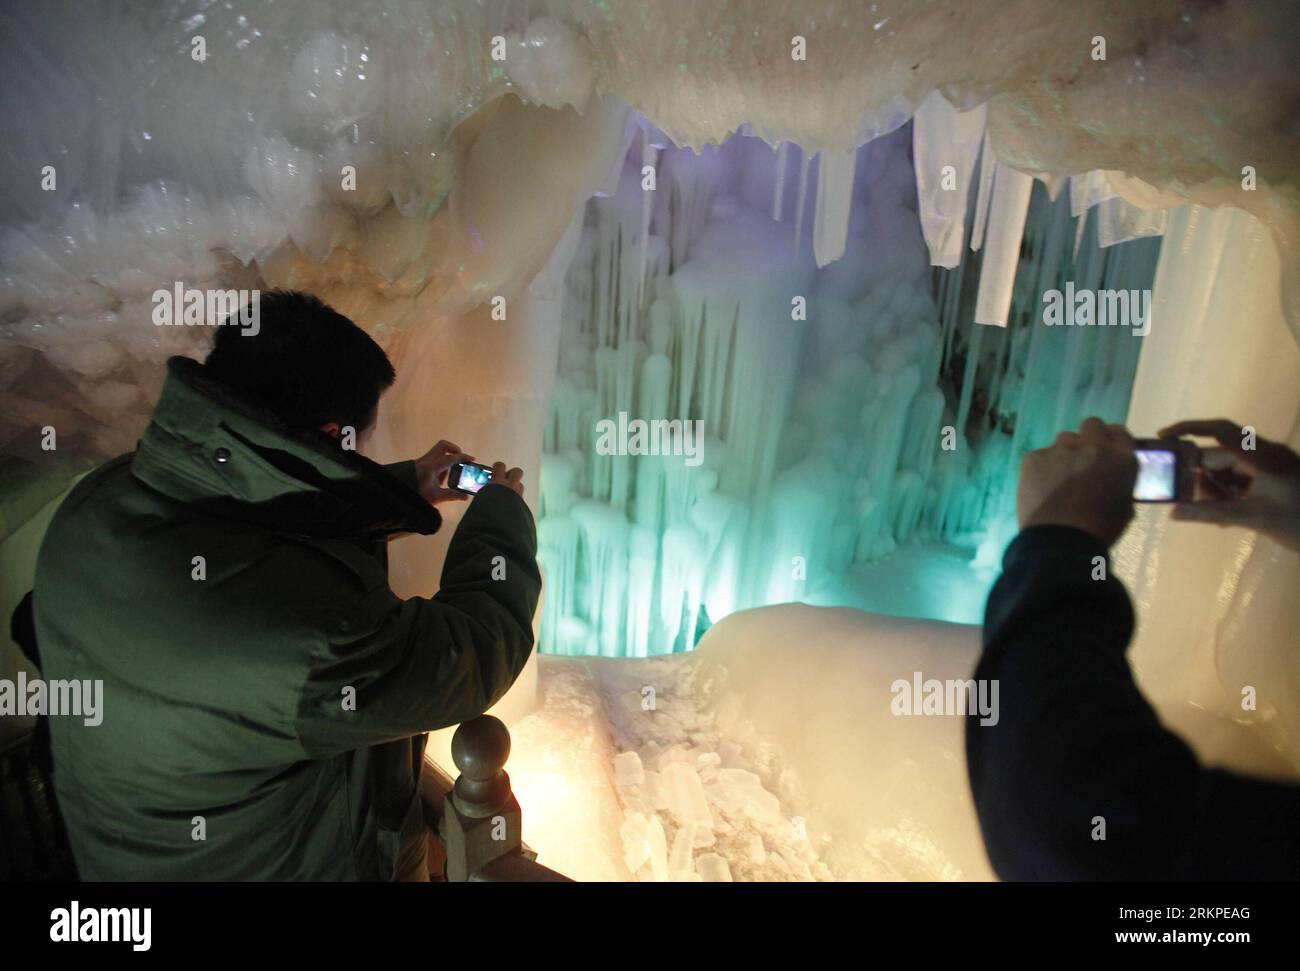 Bildnummer: 57973250  Datum: 09.05.2012  Copyright: imago/Xinhua (120509) -- NINGWU, May 9, 2012 (Xinhua) -- Visitors take photos in a three million years old ice cave in Ningwu County of Xinzhou City, north China s Shanxi Province, May 9, 2012. The cave is more than 100 meters long and ice remains all year.(Xinhua/Wang Shen) (zkr) CHINA-NINGWU-ICE CAVE(CN) PUBLICATIONxNOTxINxCHN Gesellschaft Höhle Eishöhle Eiszapfen x0x xst premiumd Highlight 2012 quer      57973250 Date 09 05 2012 Copyright Imago XINHUA  Ningwu May 9 2012 XINHUA Visitors Take Photos in a Three Million Years Old ICE Cave in N Stock Photo